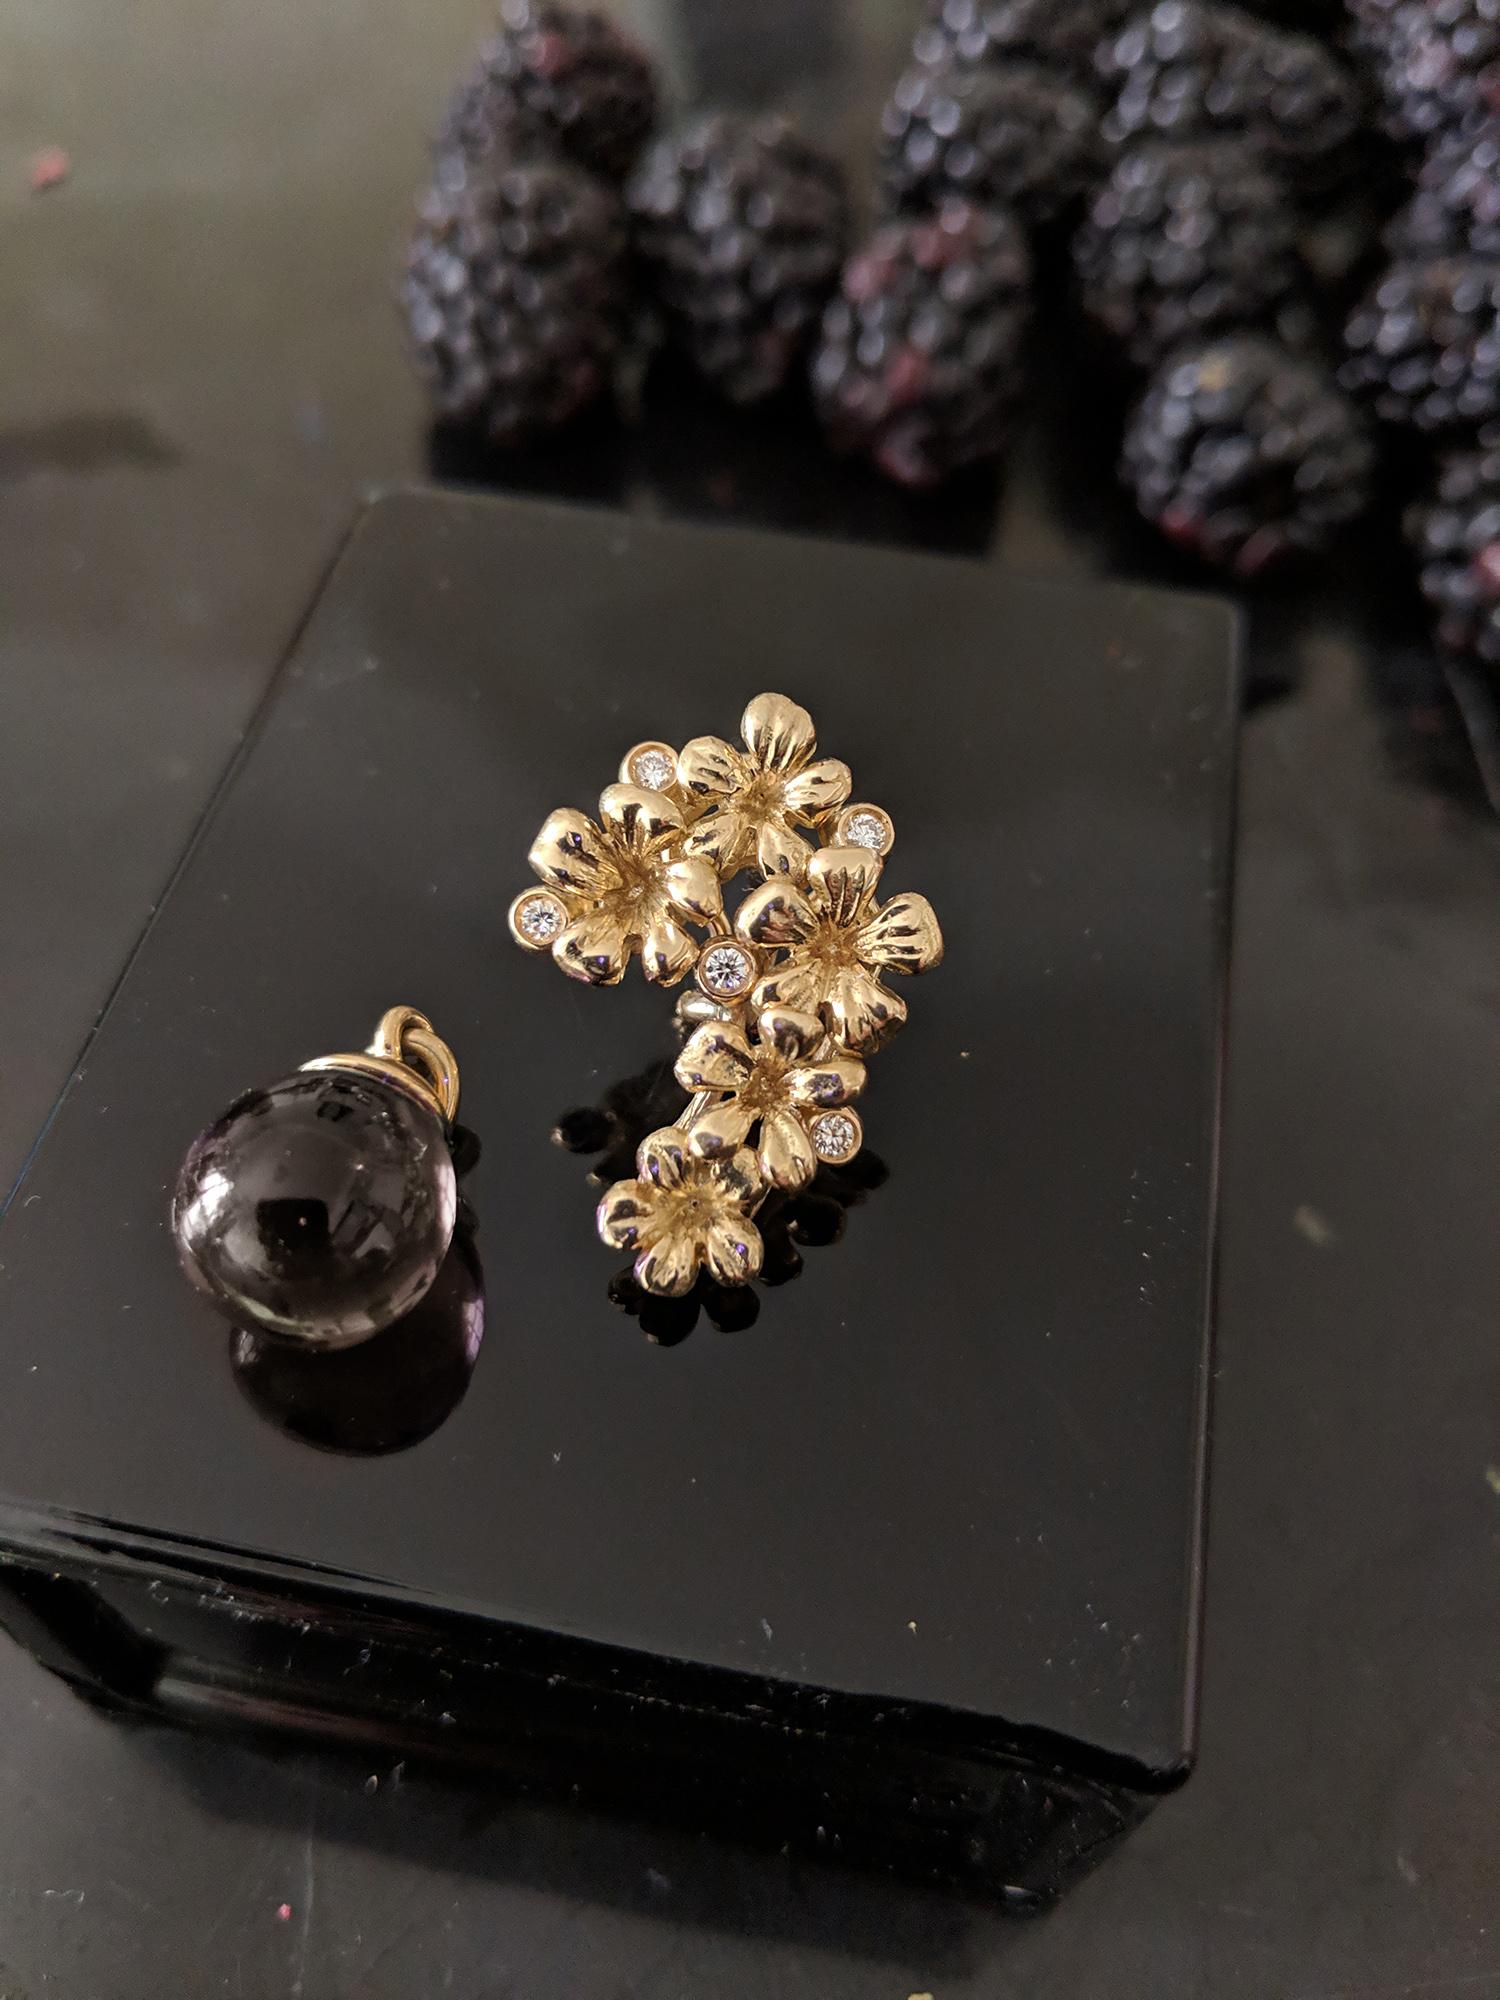 This Plum Blossom Brooch is a unique sculptural piece made from 18 karat yellow gold, encrusted with 5 round diamonds and a removable cabochon smoky quartz drop. We use top natural diamonds, VS clarity and F-G color, and work with a German gems